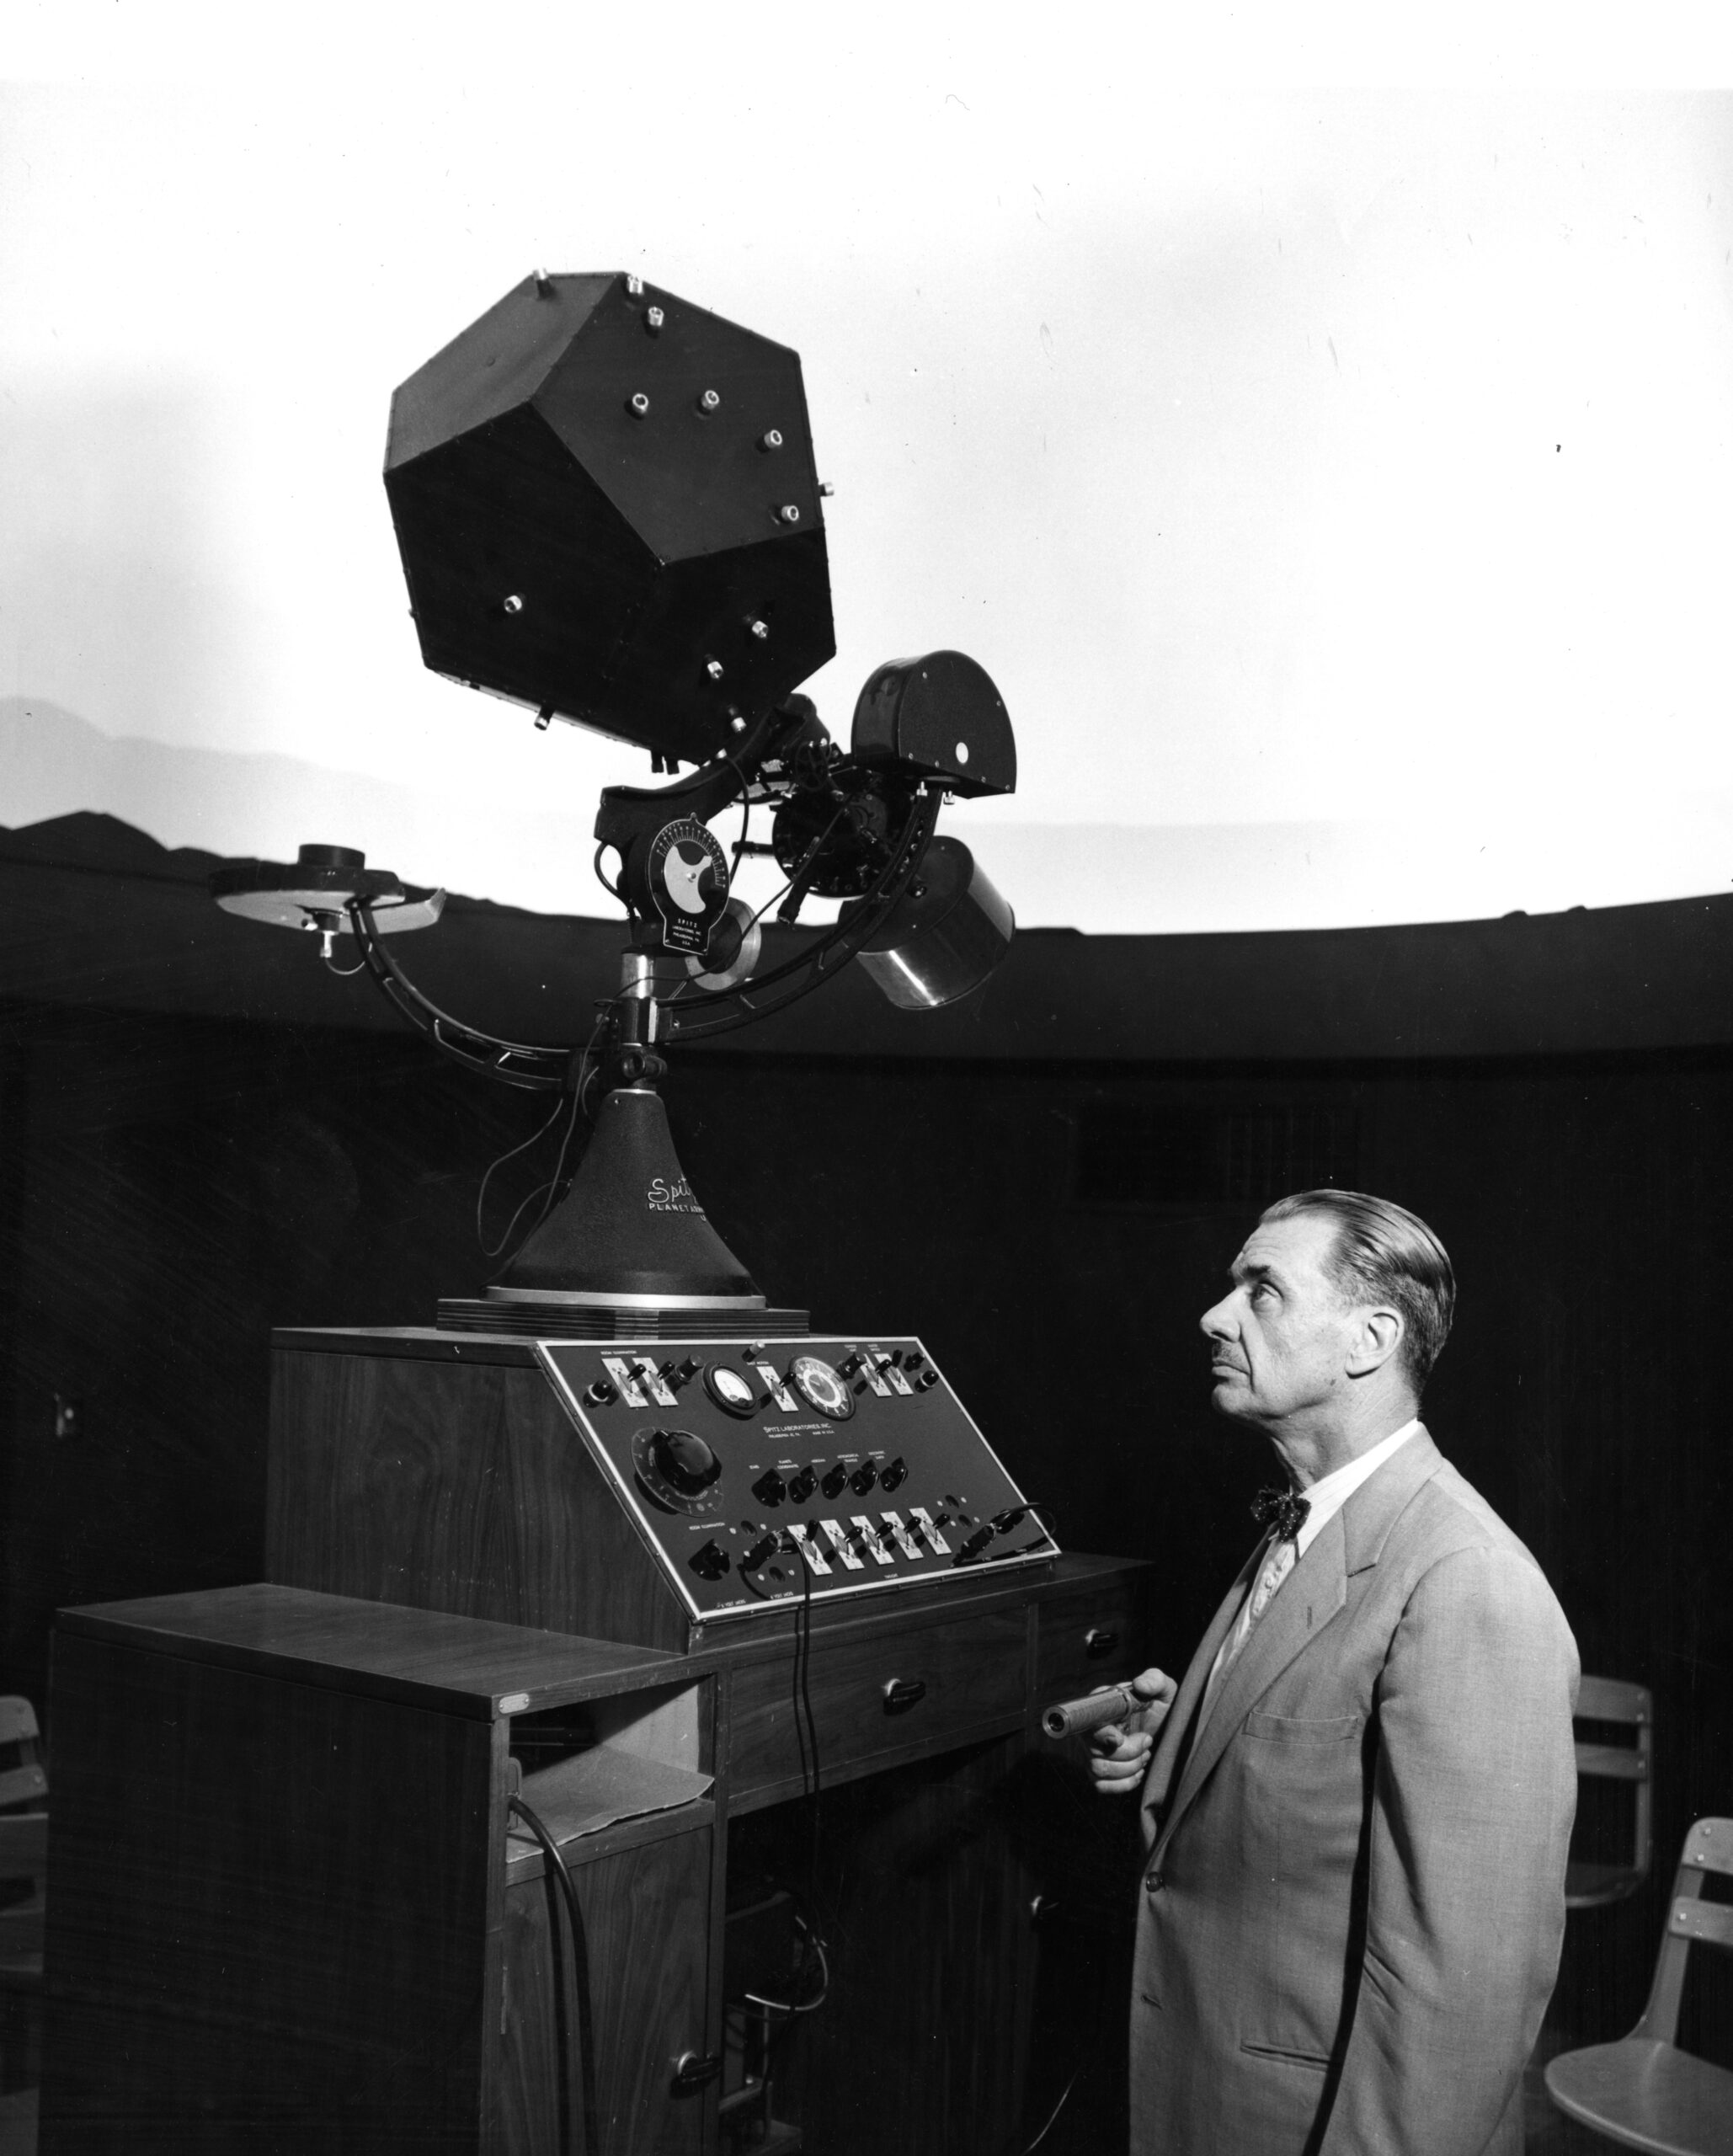 A man in a suit looks at an old-school planetarium projector, greyscale